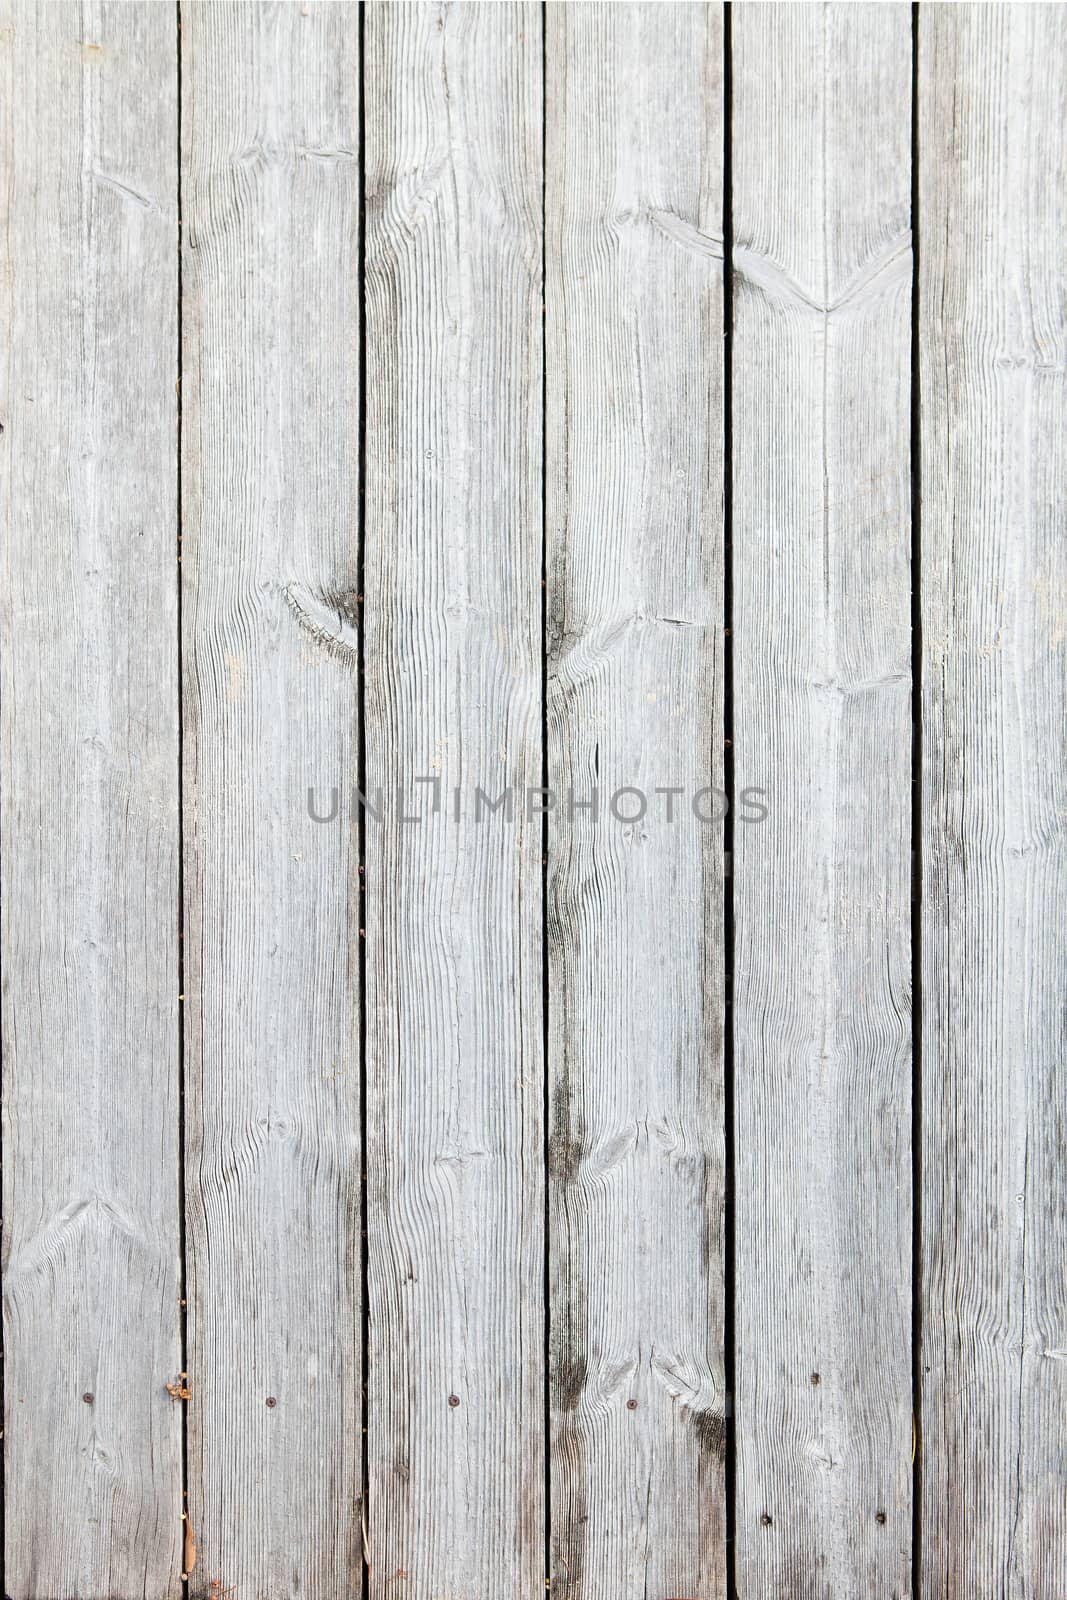 The old Wood pattern wall background.